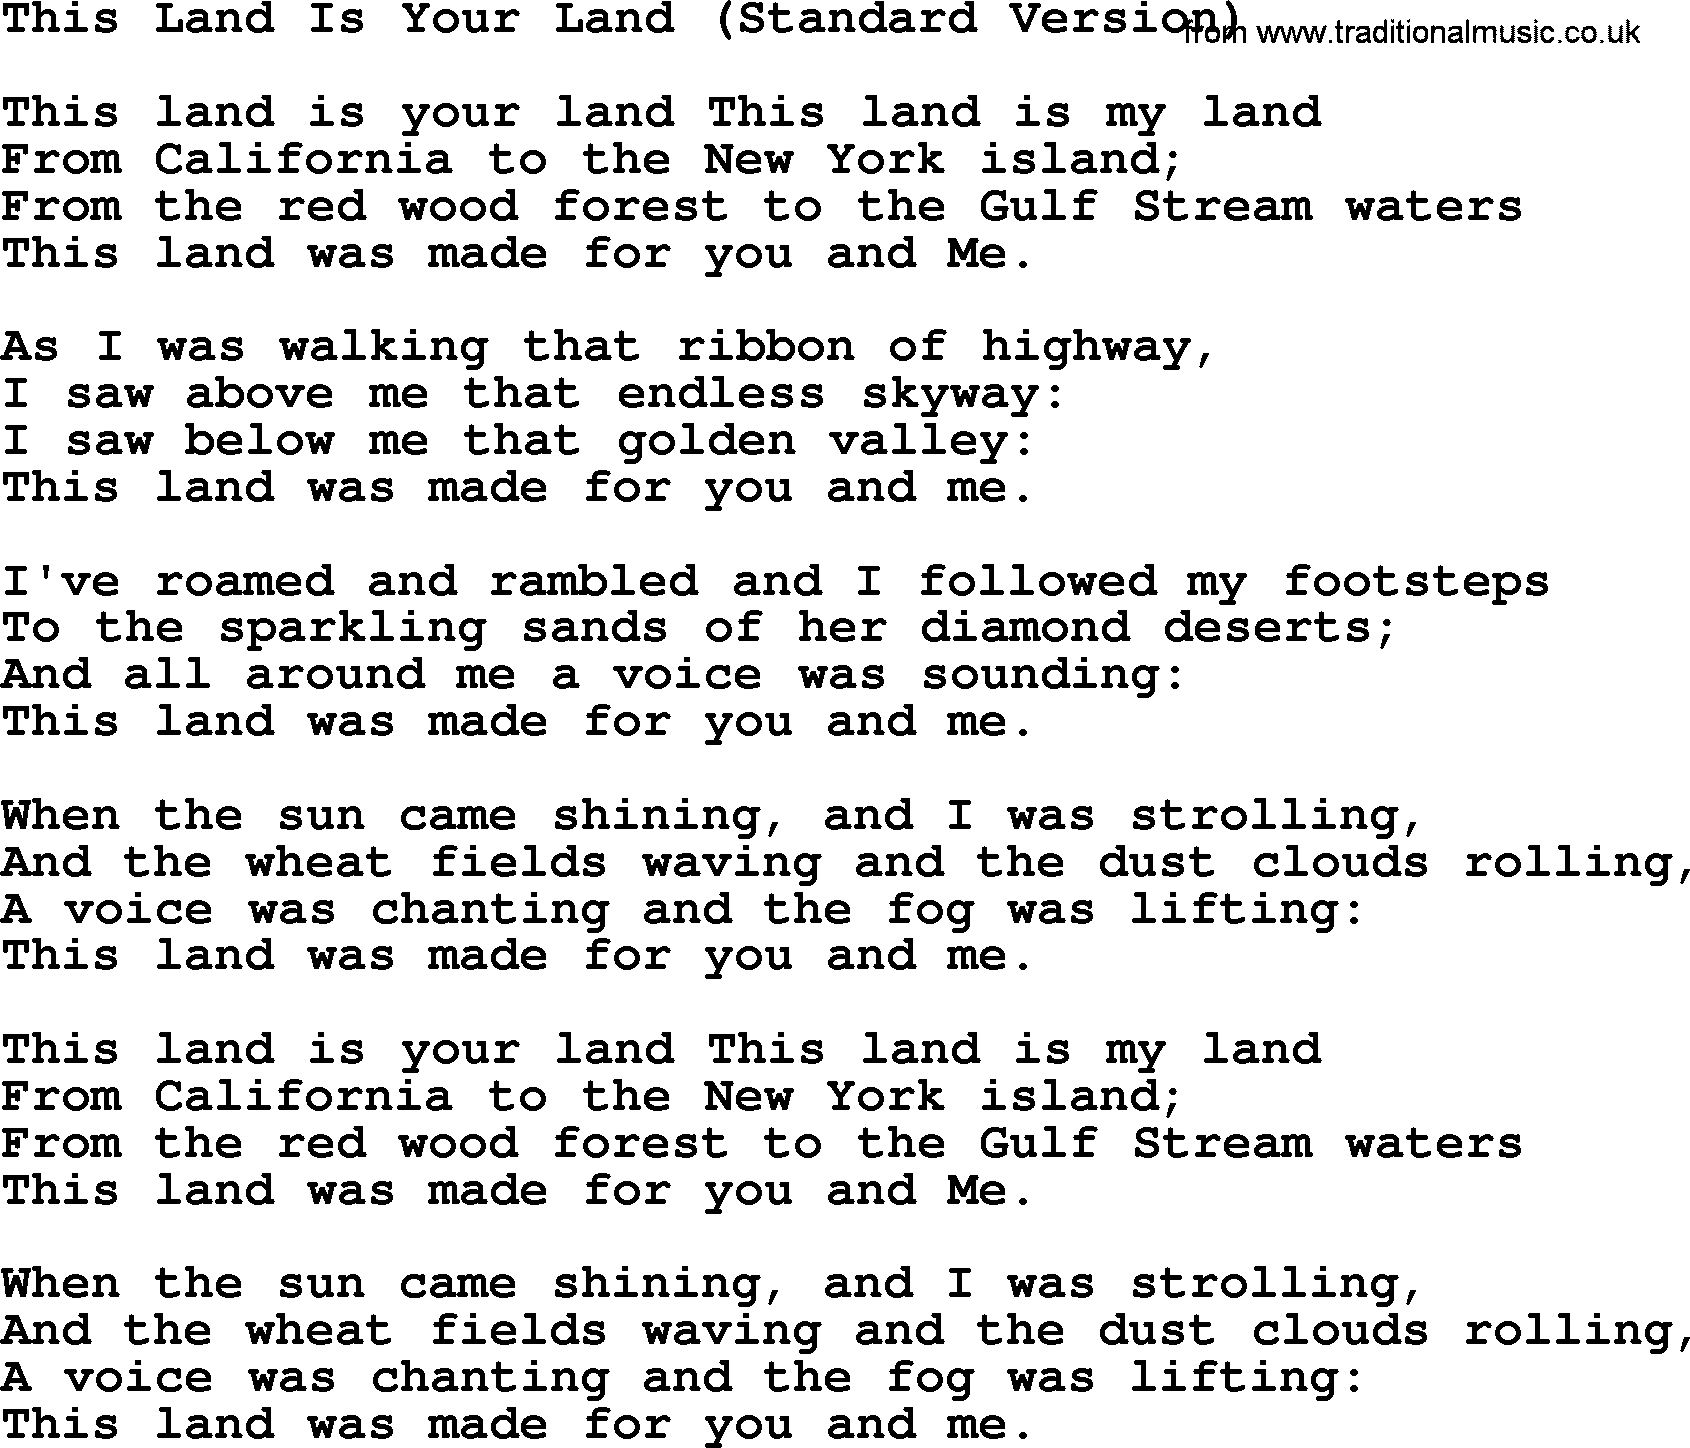 Woody Guthrie song This Land Is Your Land Standard Version lyrics